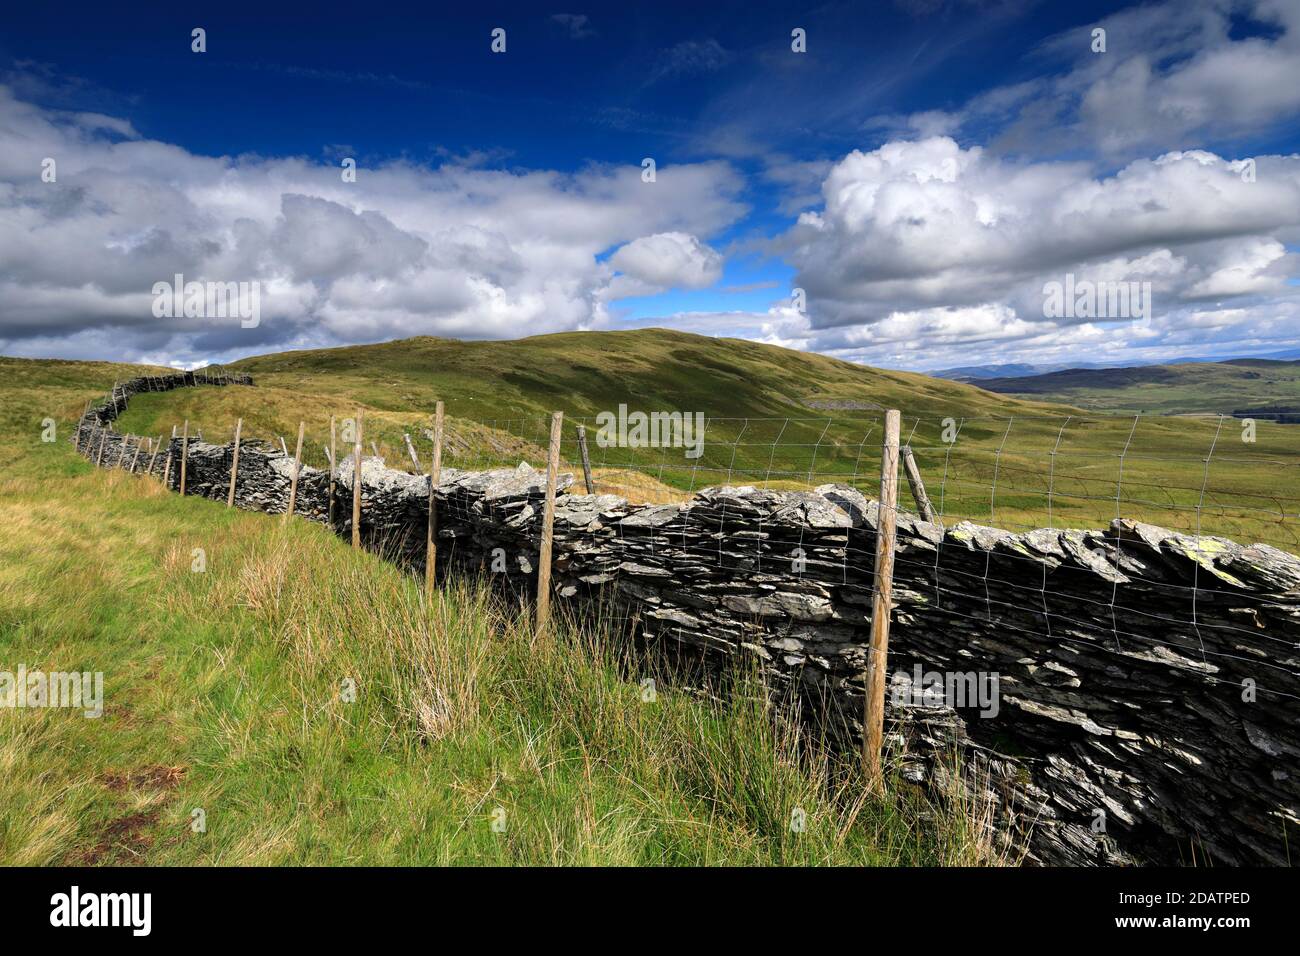 View to the Summit of Sallows fell, Troutbeck valley, Kirkstone pass, Lake District National Park, Cumbria, England, UK Sallows fell is one of the 214 Stock Photo